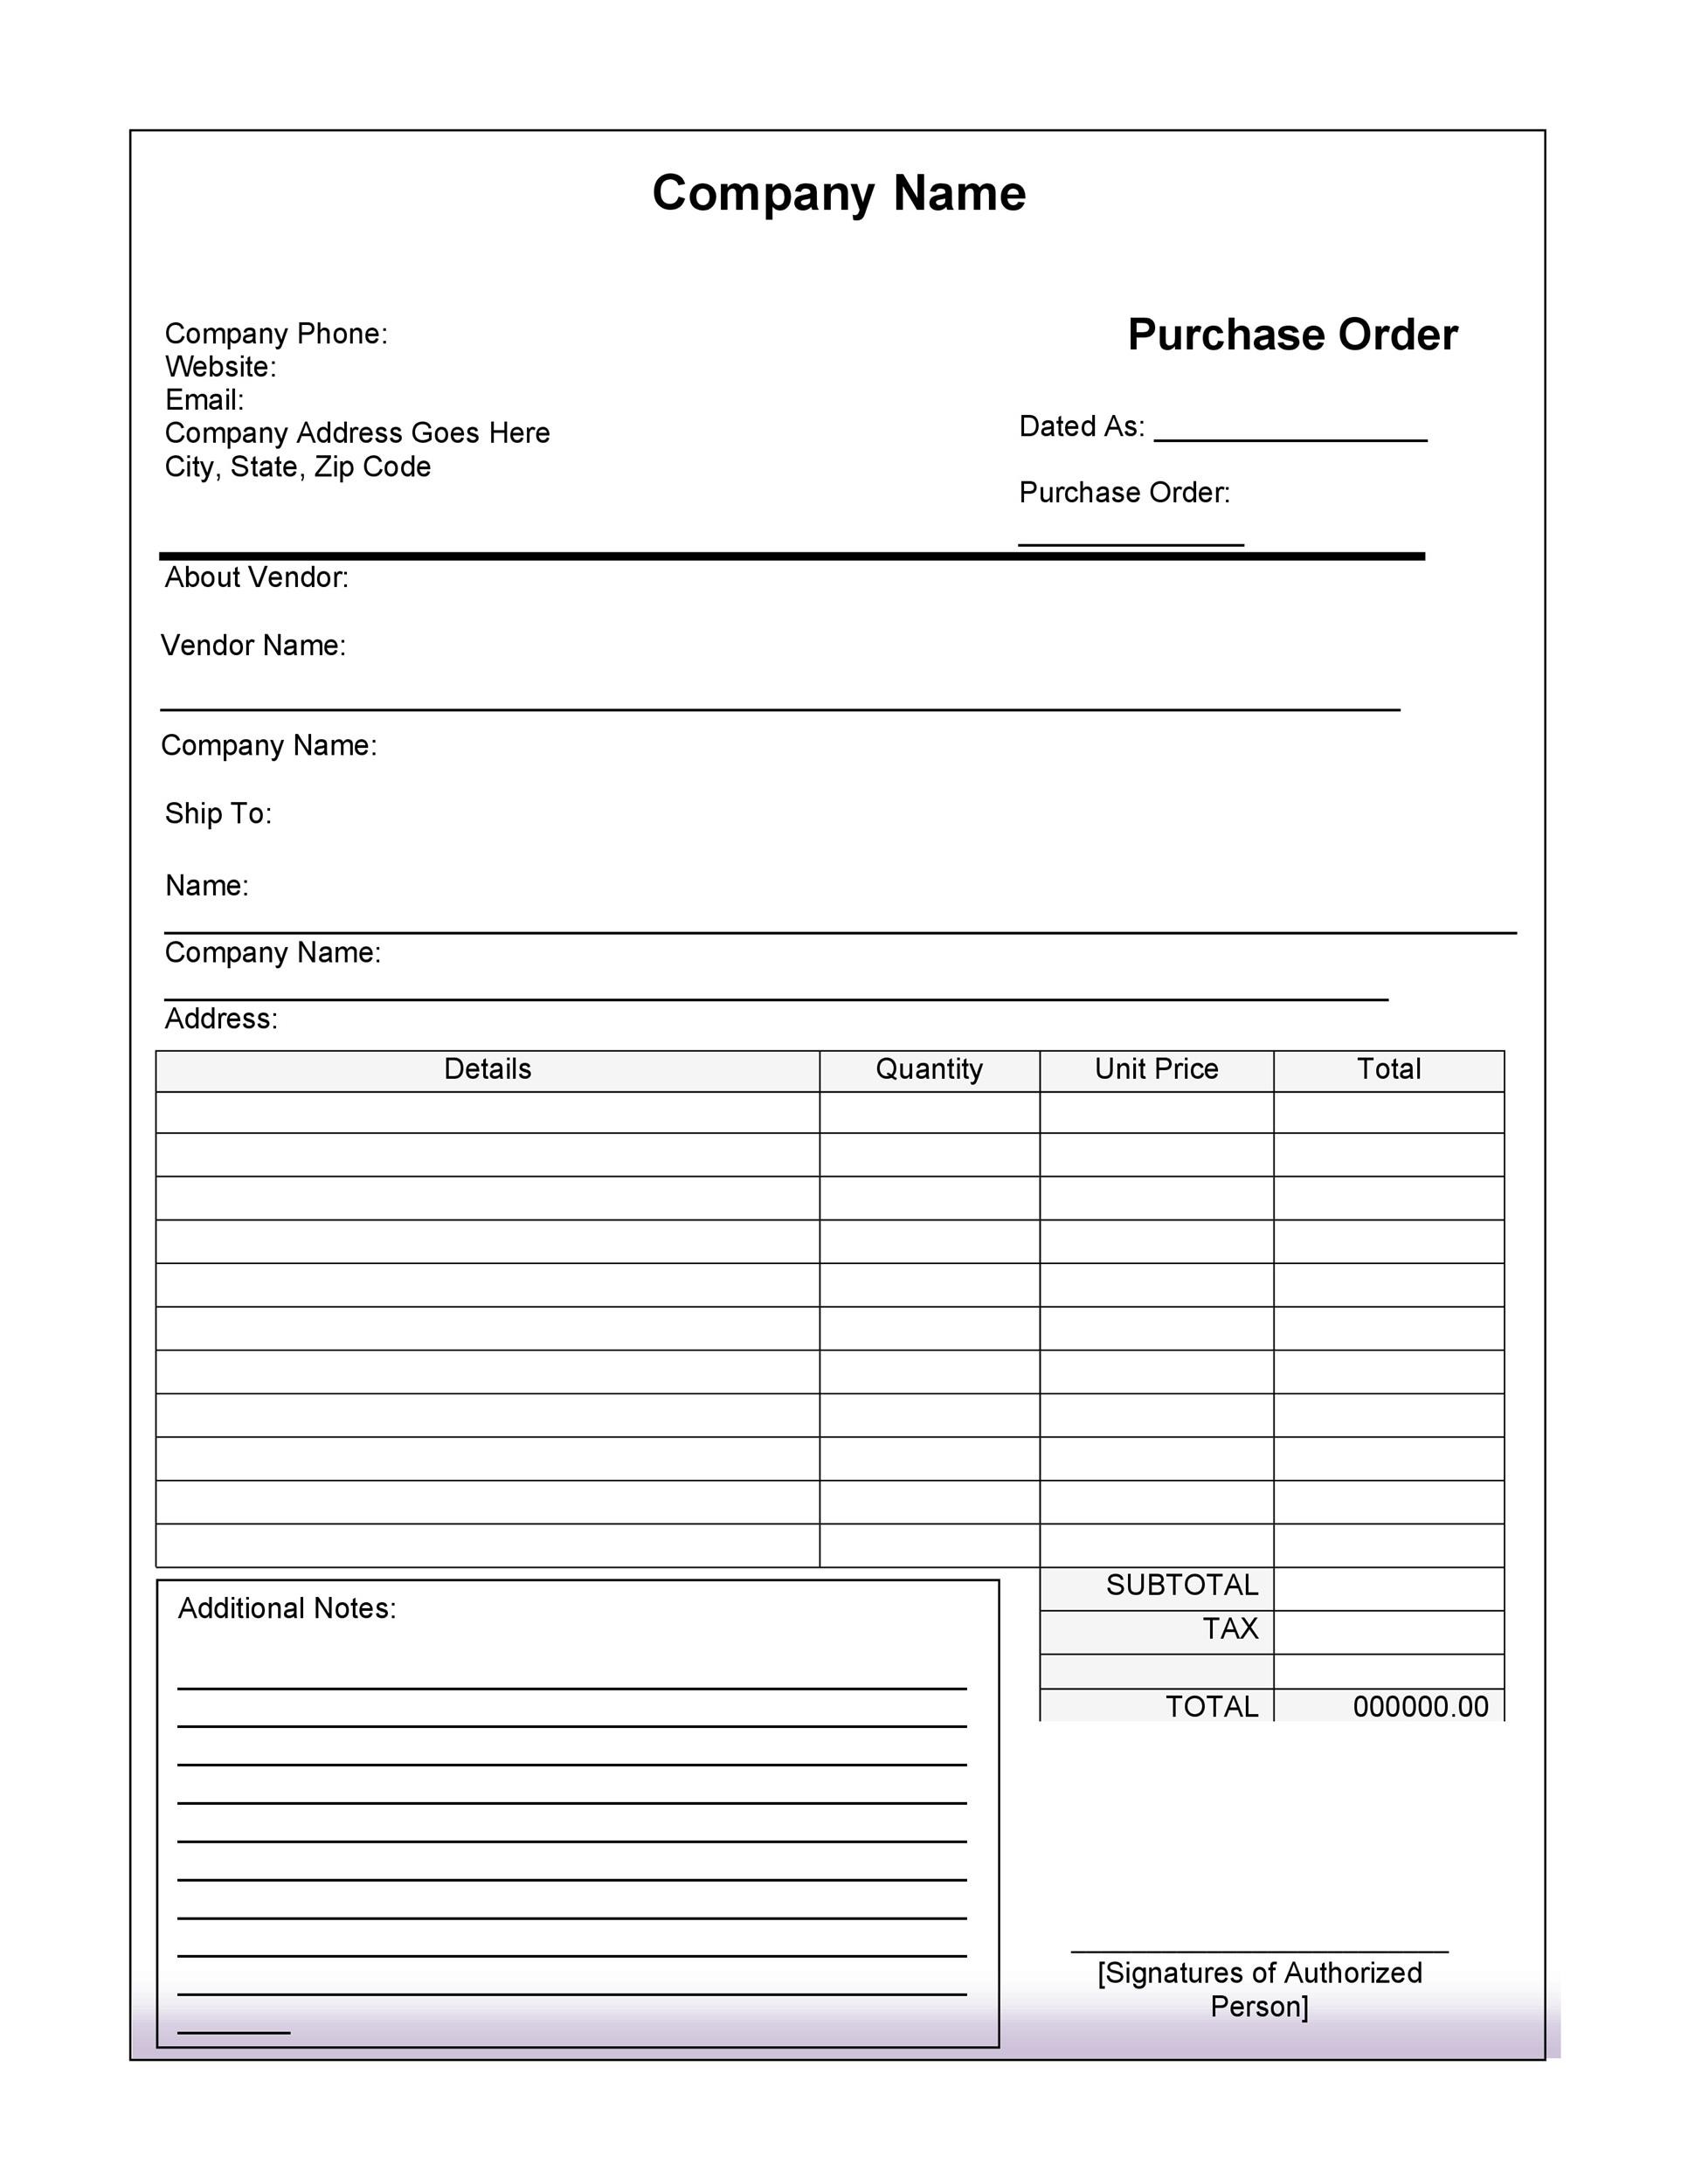 purchase orders and invoices